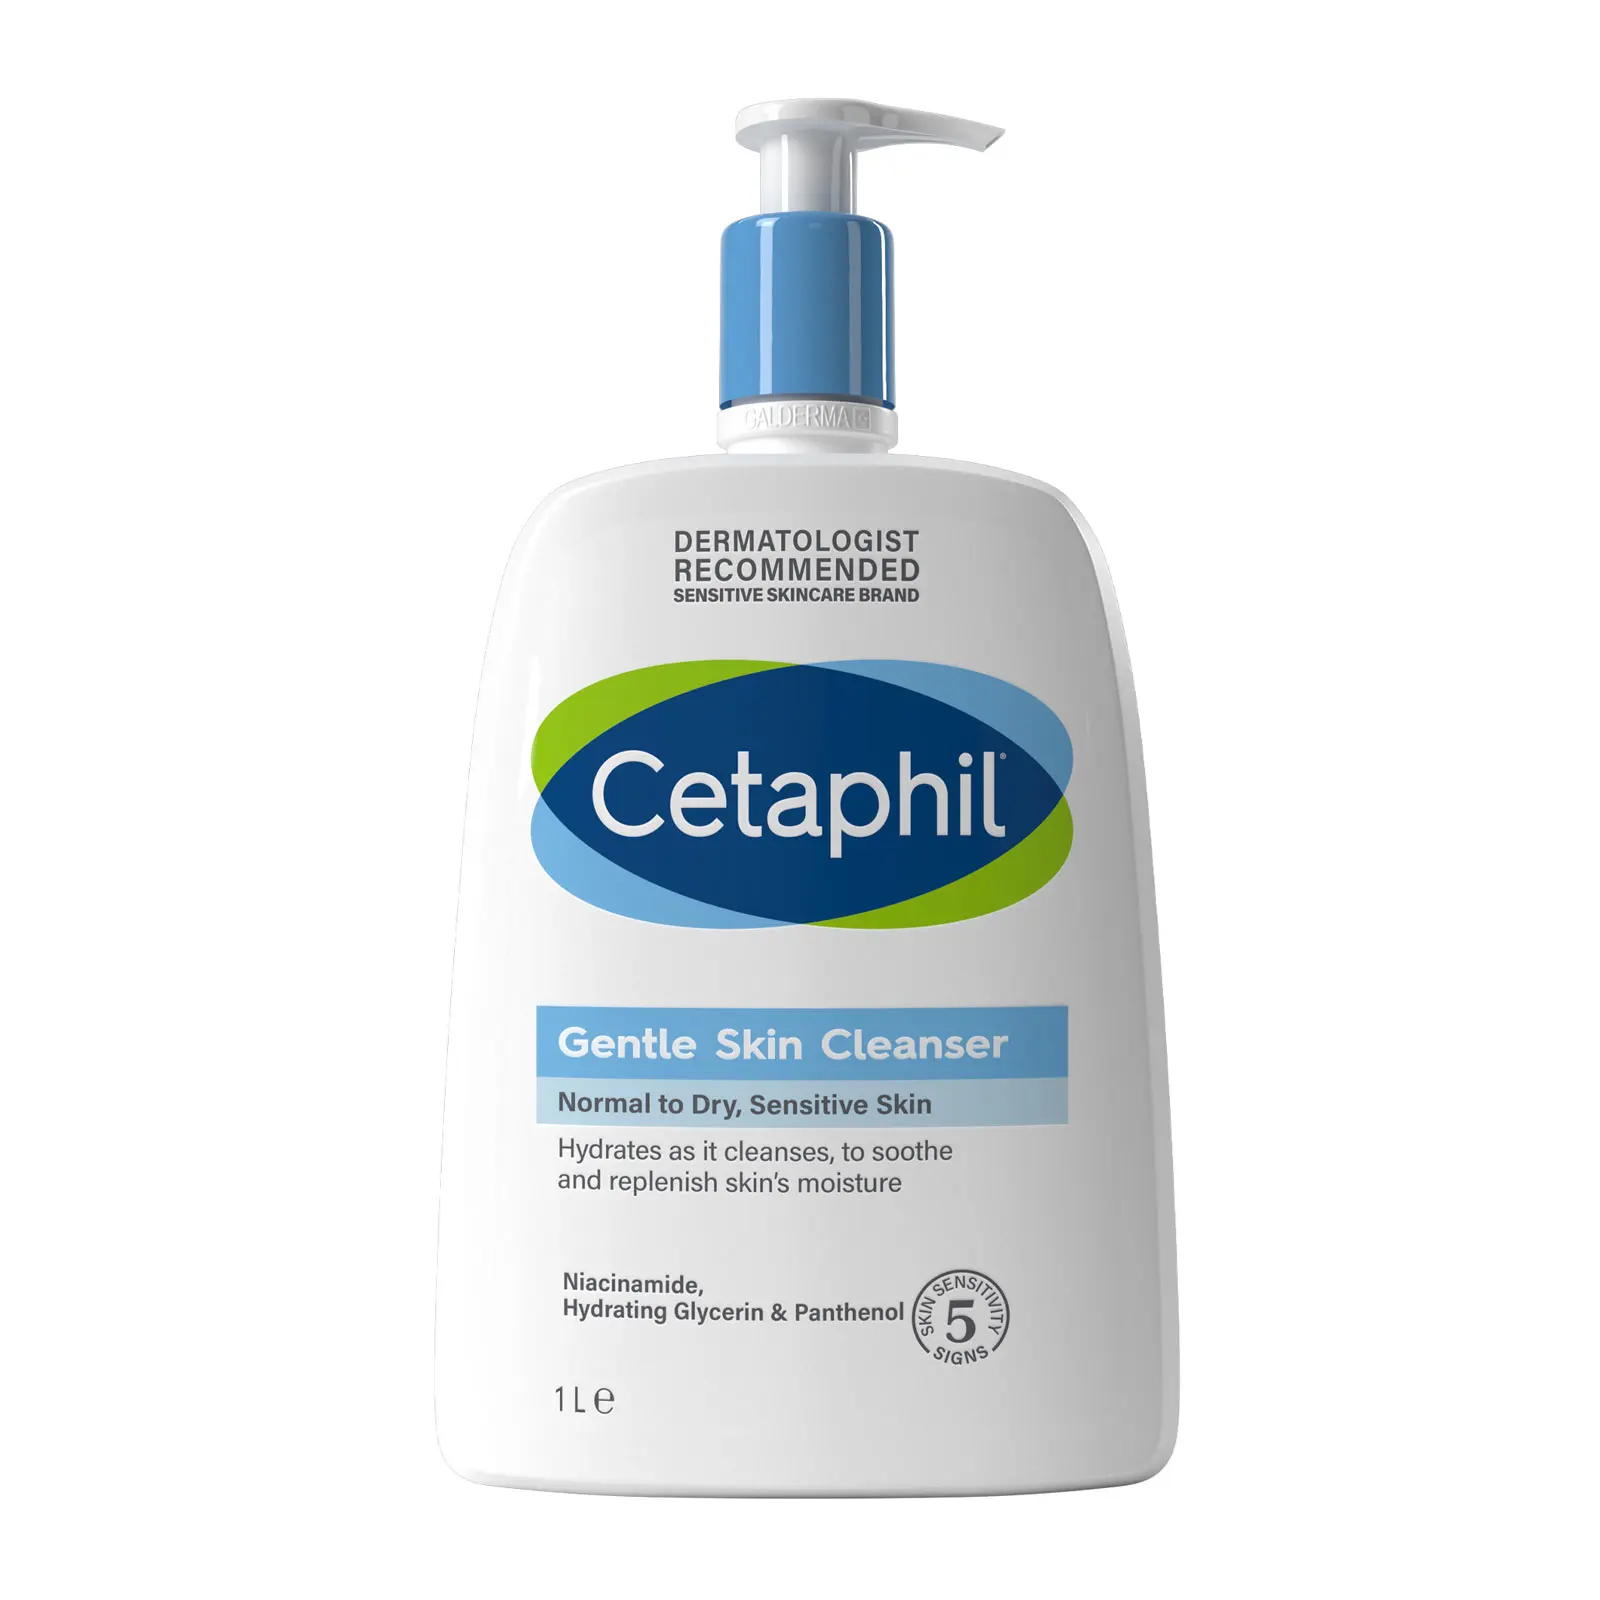 Cetaphil Gentle Skin Cleanser Discounts and Cashback